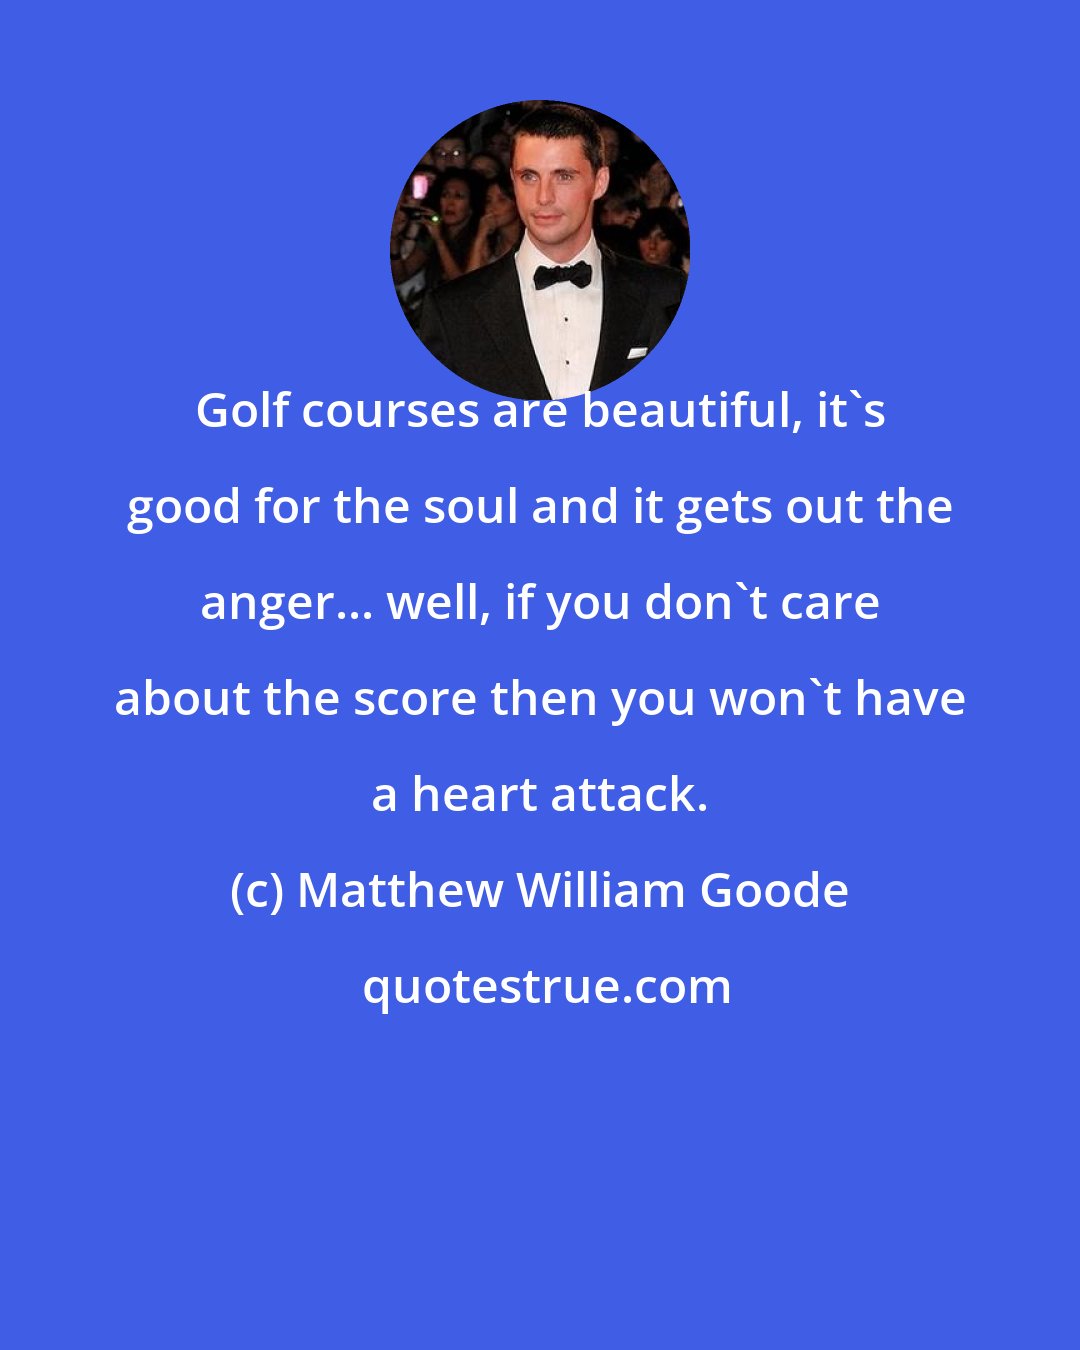 Matthew William Goode: Golf courses are beautiful, it's good for the soul and it gets out the anger... well, if you don't care about the score then you won't have a heart attack.